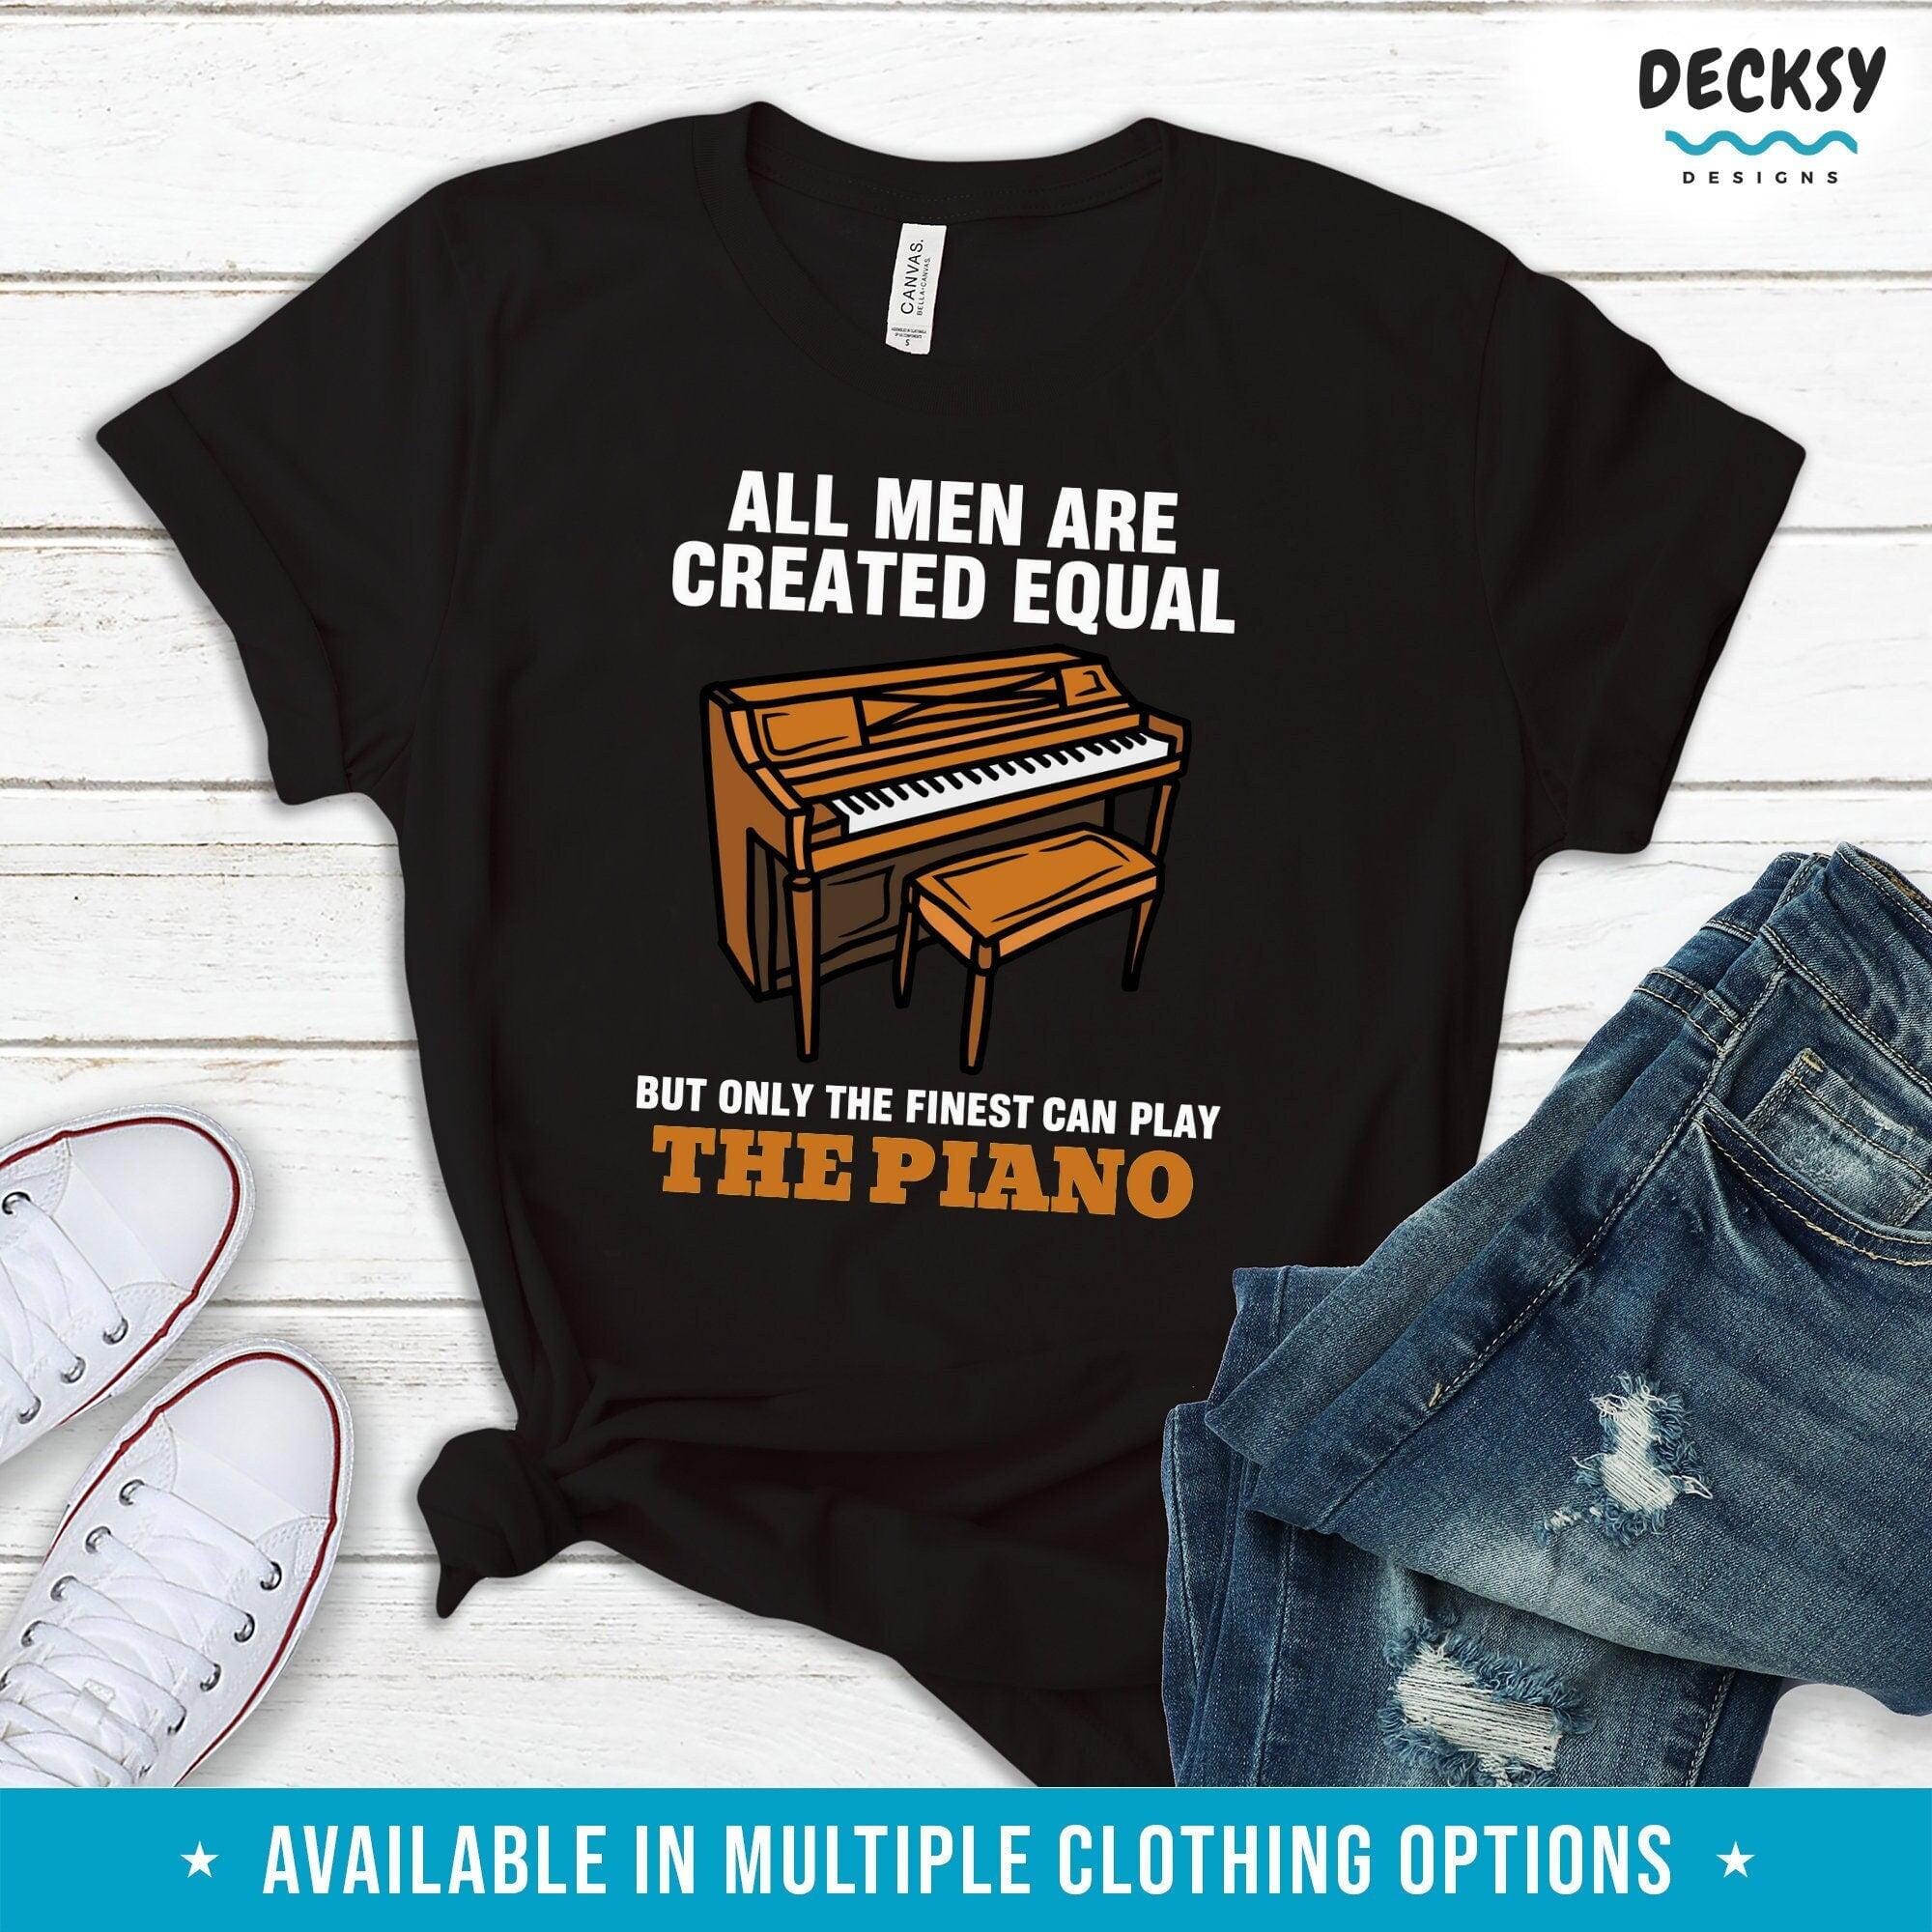 Piano Teacher Shirt, Pianist Gift For Him-Clothing:Gender-Neutral Adult Clothing:Tops & Tees:T-shirts:Graphic Tees-DecksyDesigns